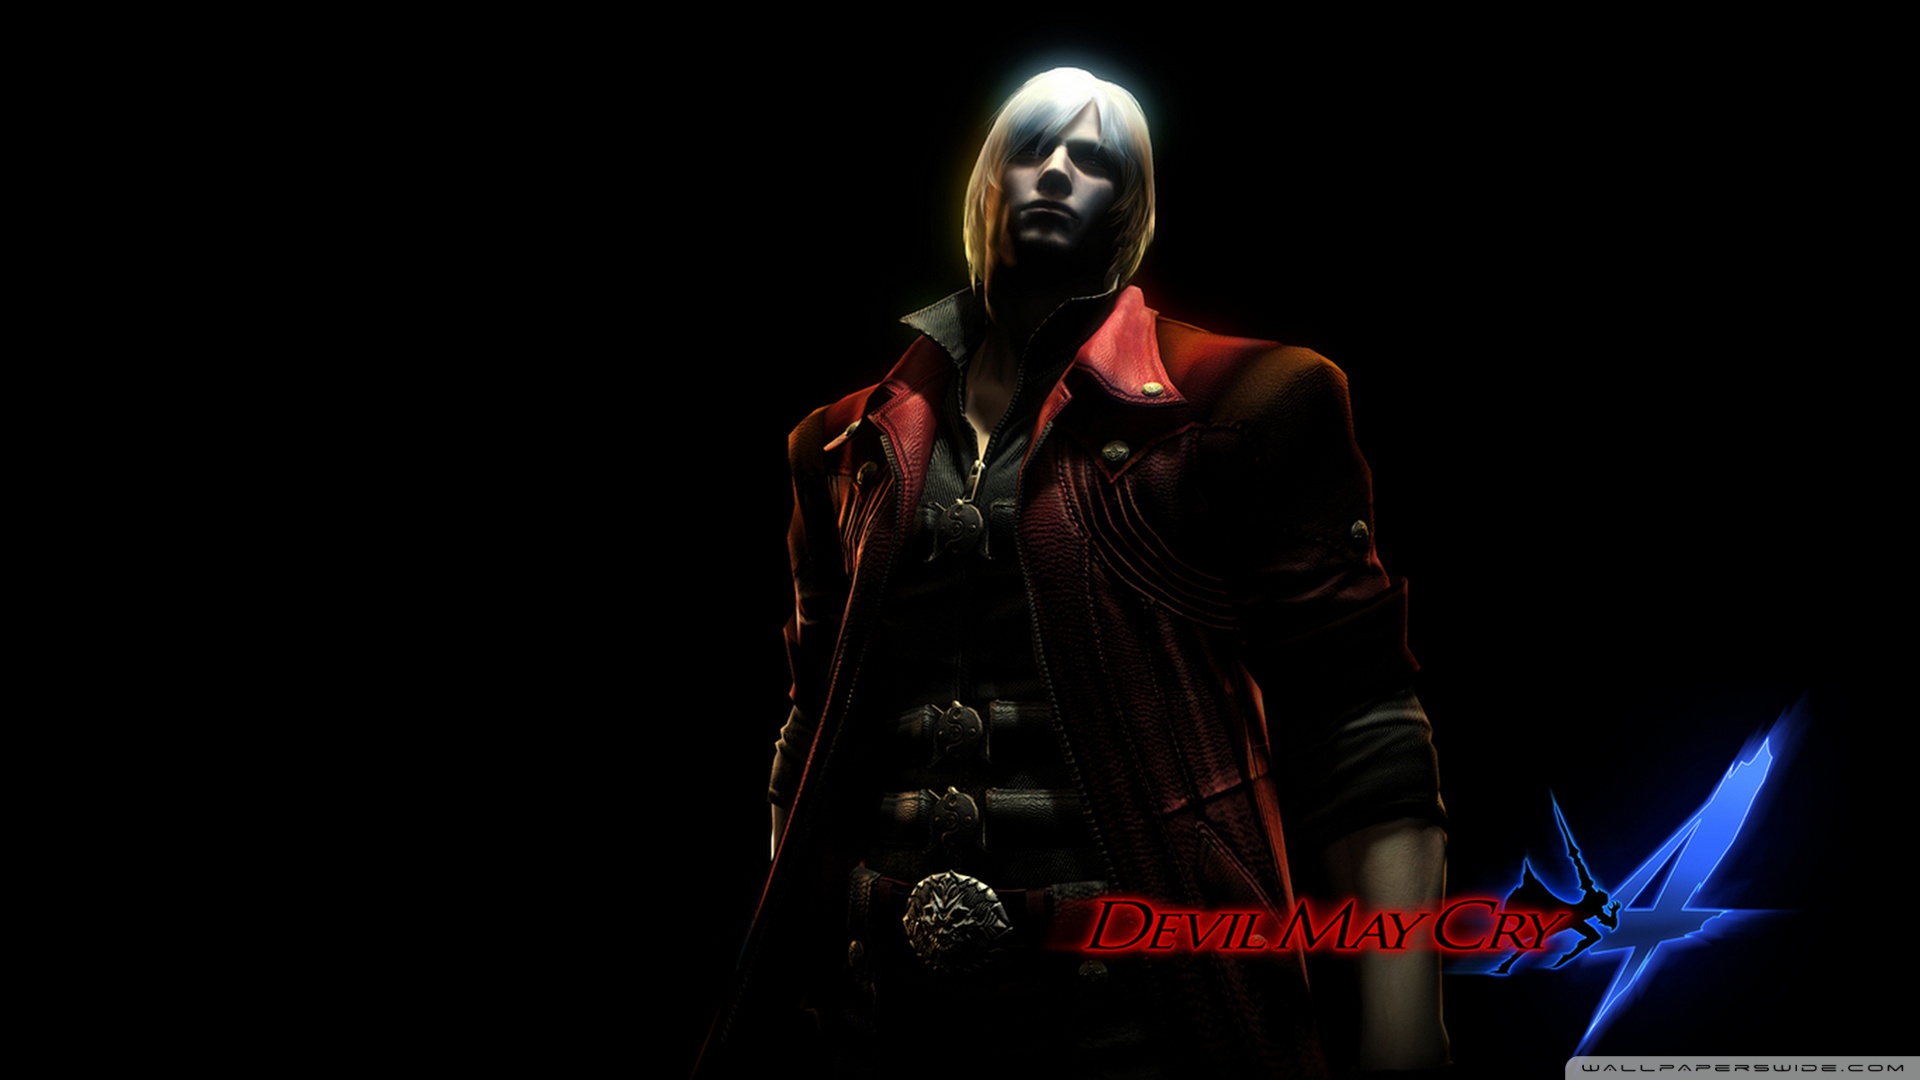 Devil May Cry Dante Wallpaper 1920x1080 Devil May Cry